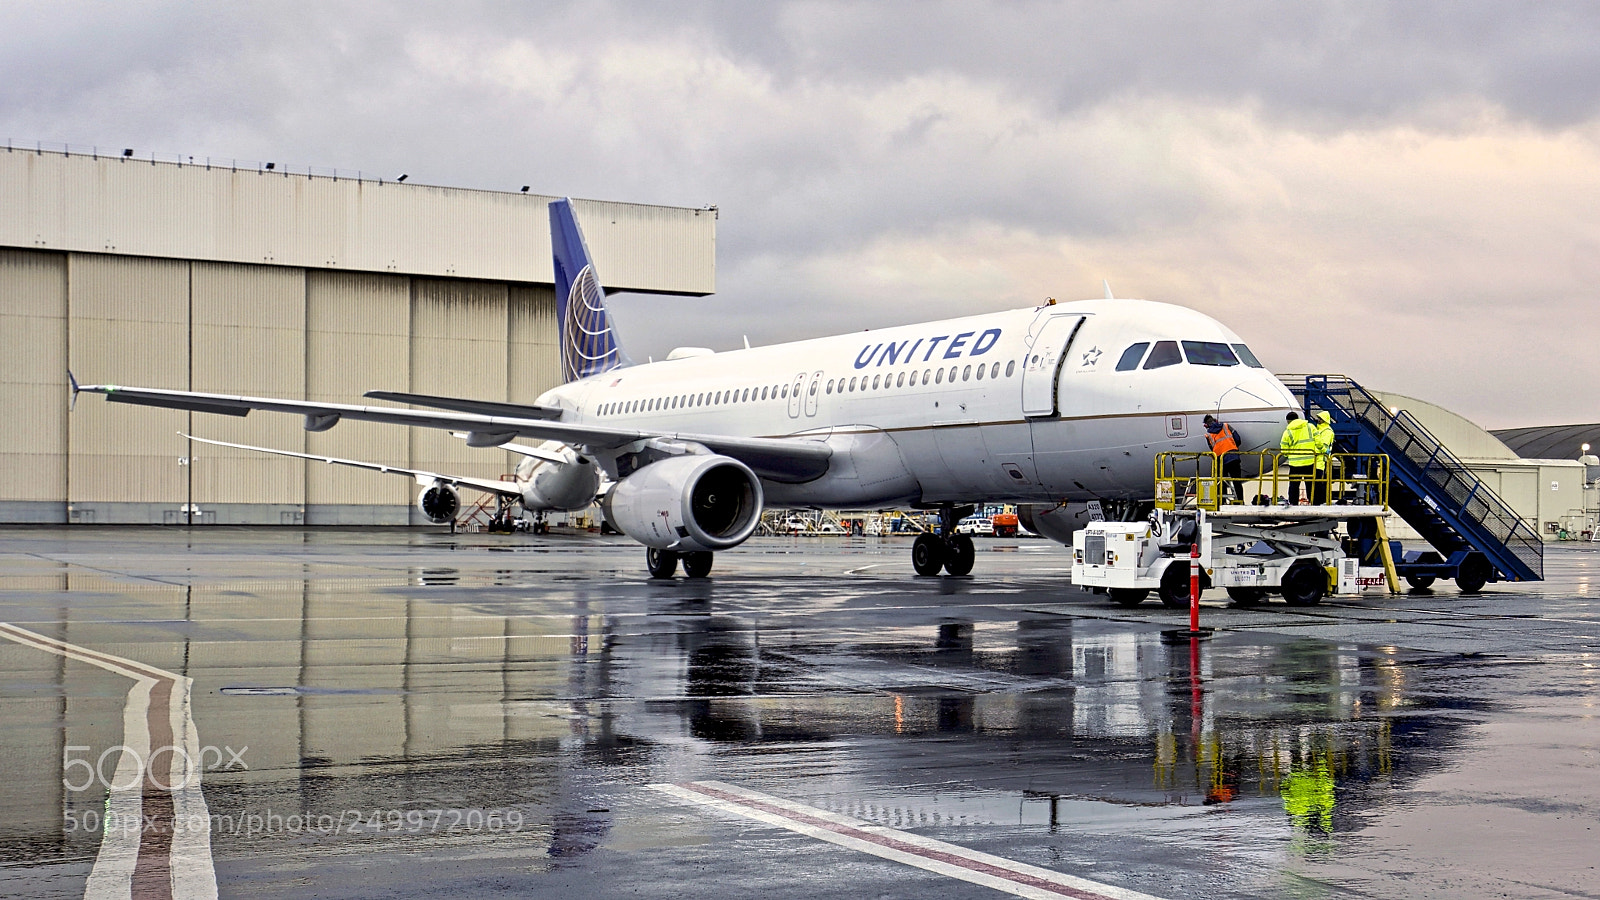 Sony a7R III sample photo. United airlines 2001 airbus photography